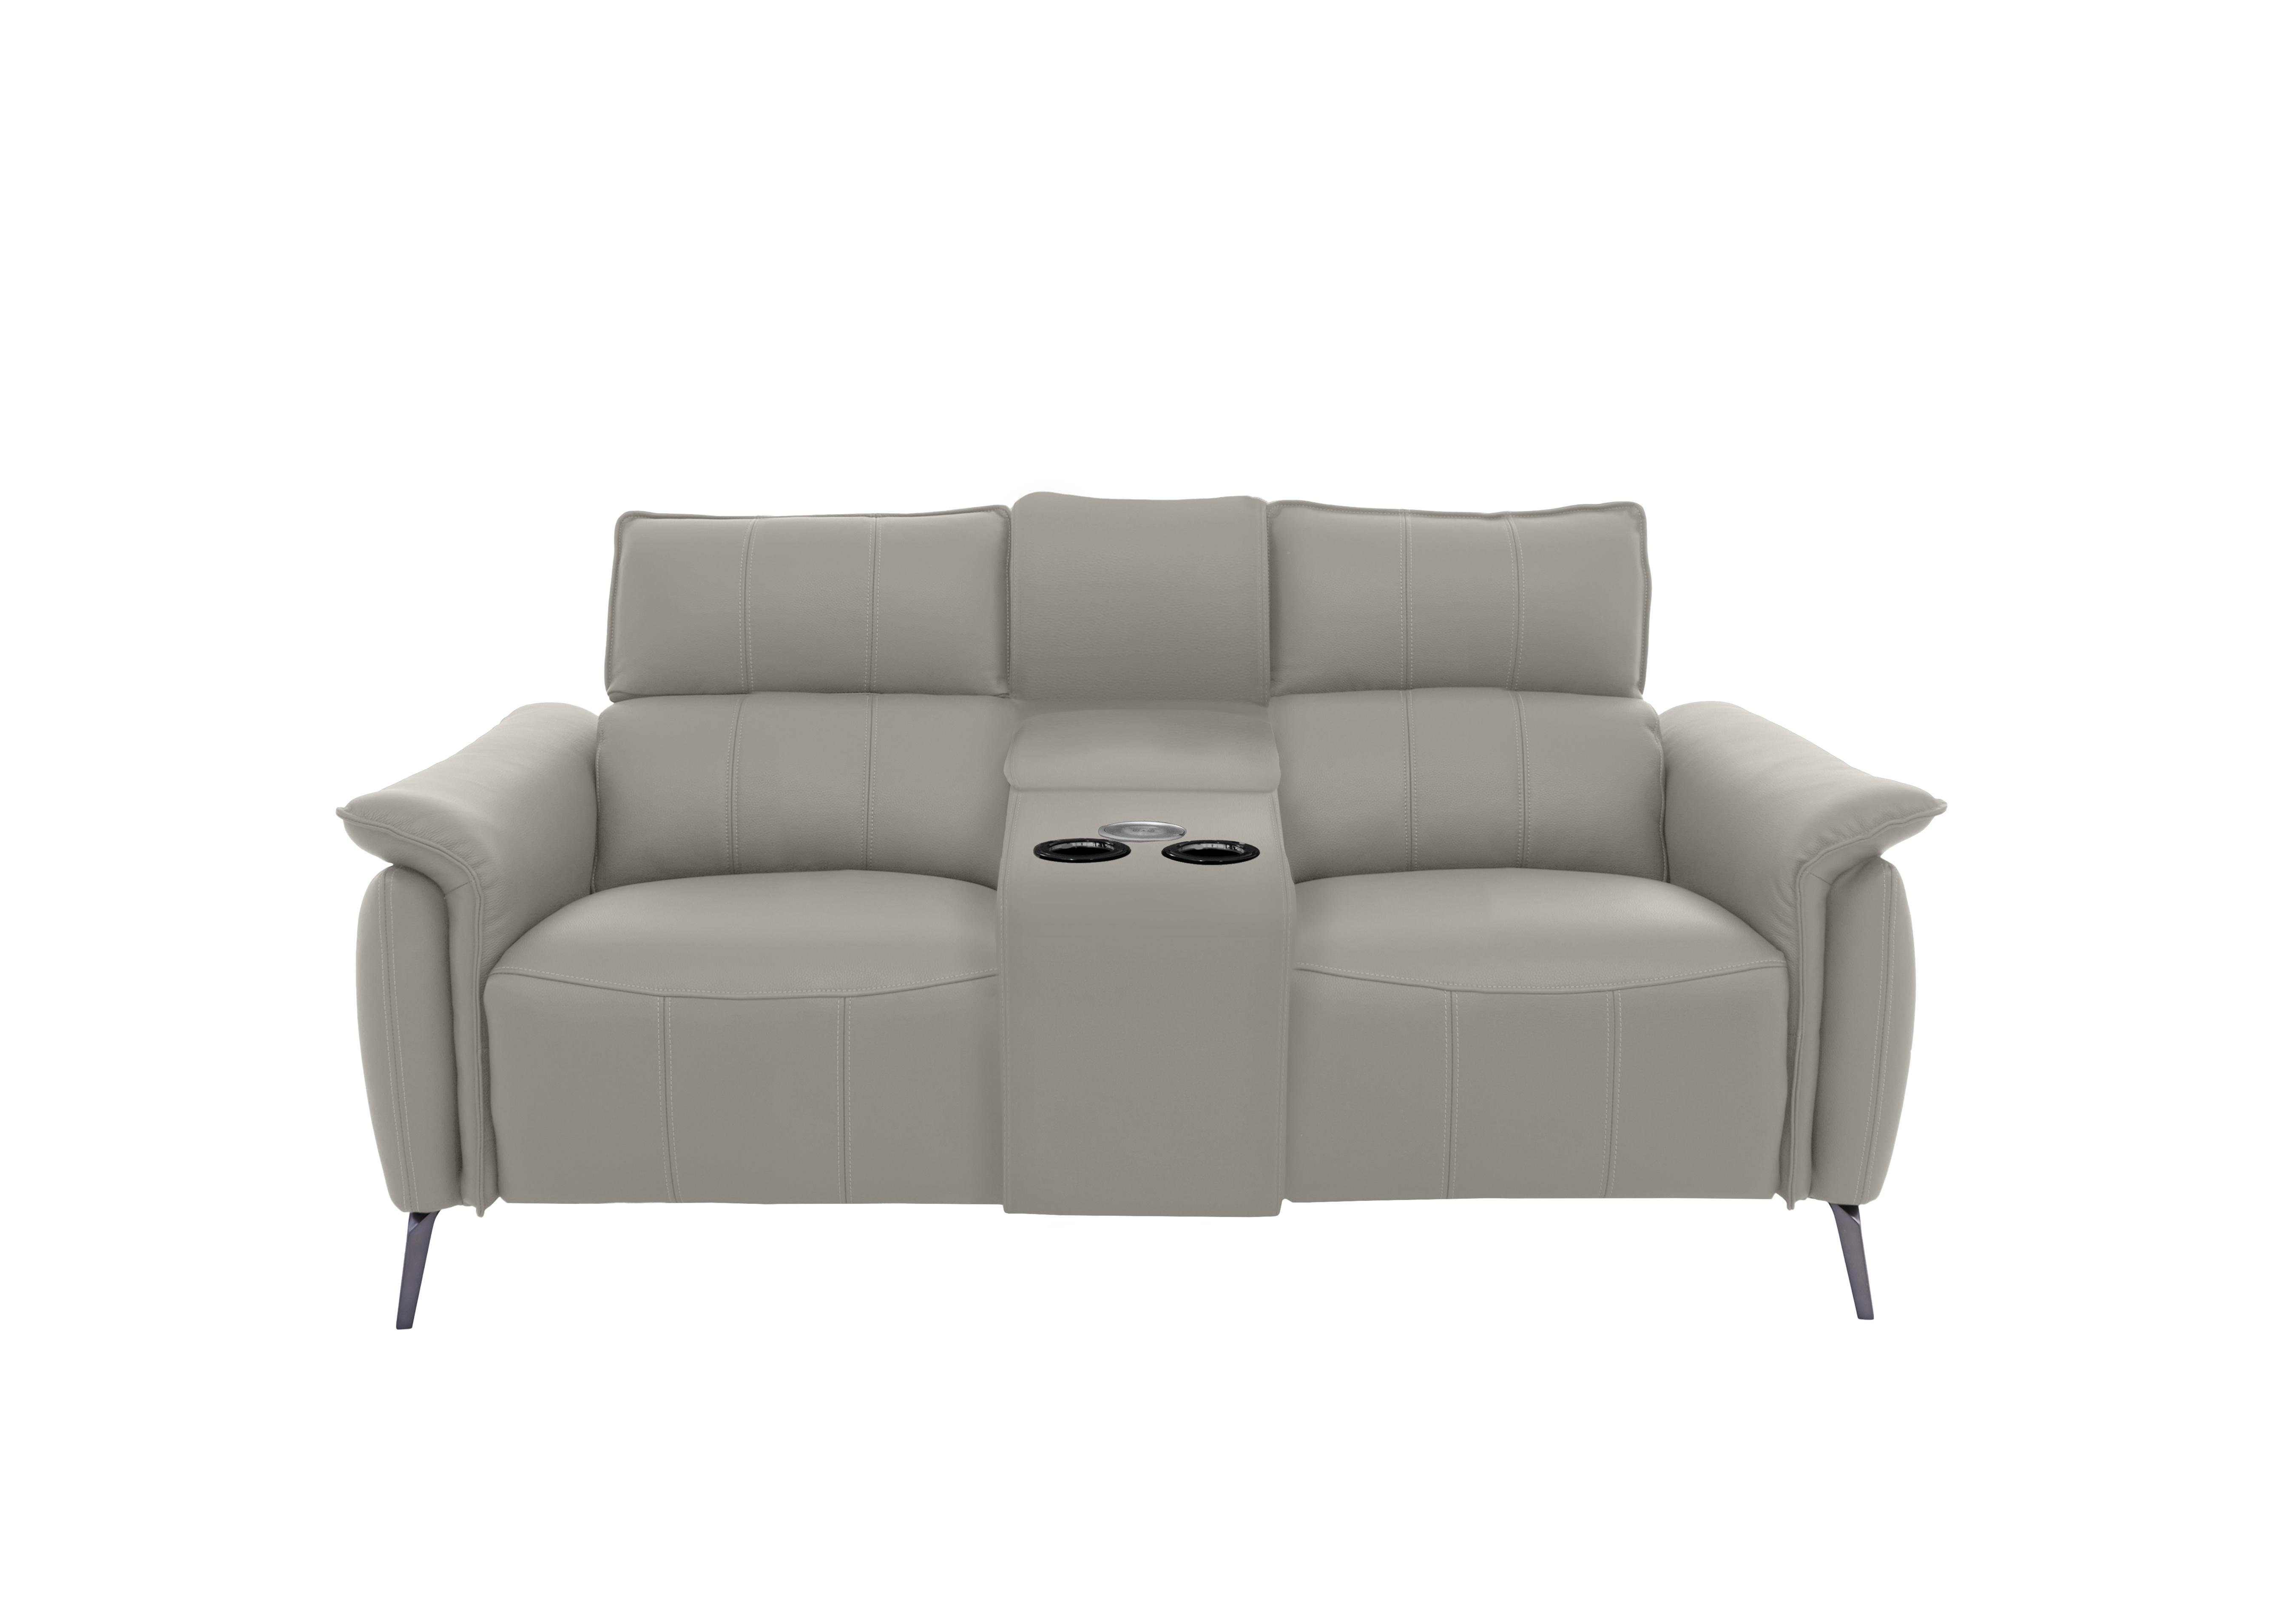 Jude 2 Seater Leather Power Recliner Sofa with Smart Console Unit and Power Telescopic Headrests in Montana New Grey Cat-60/28 on Furniture Village